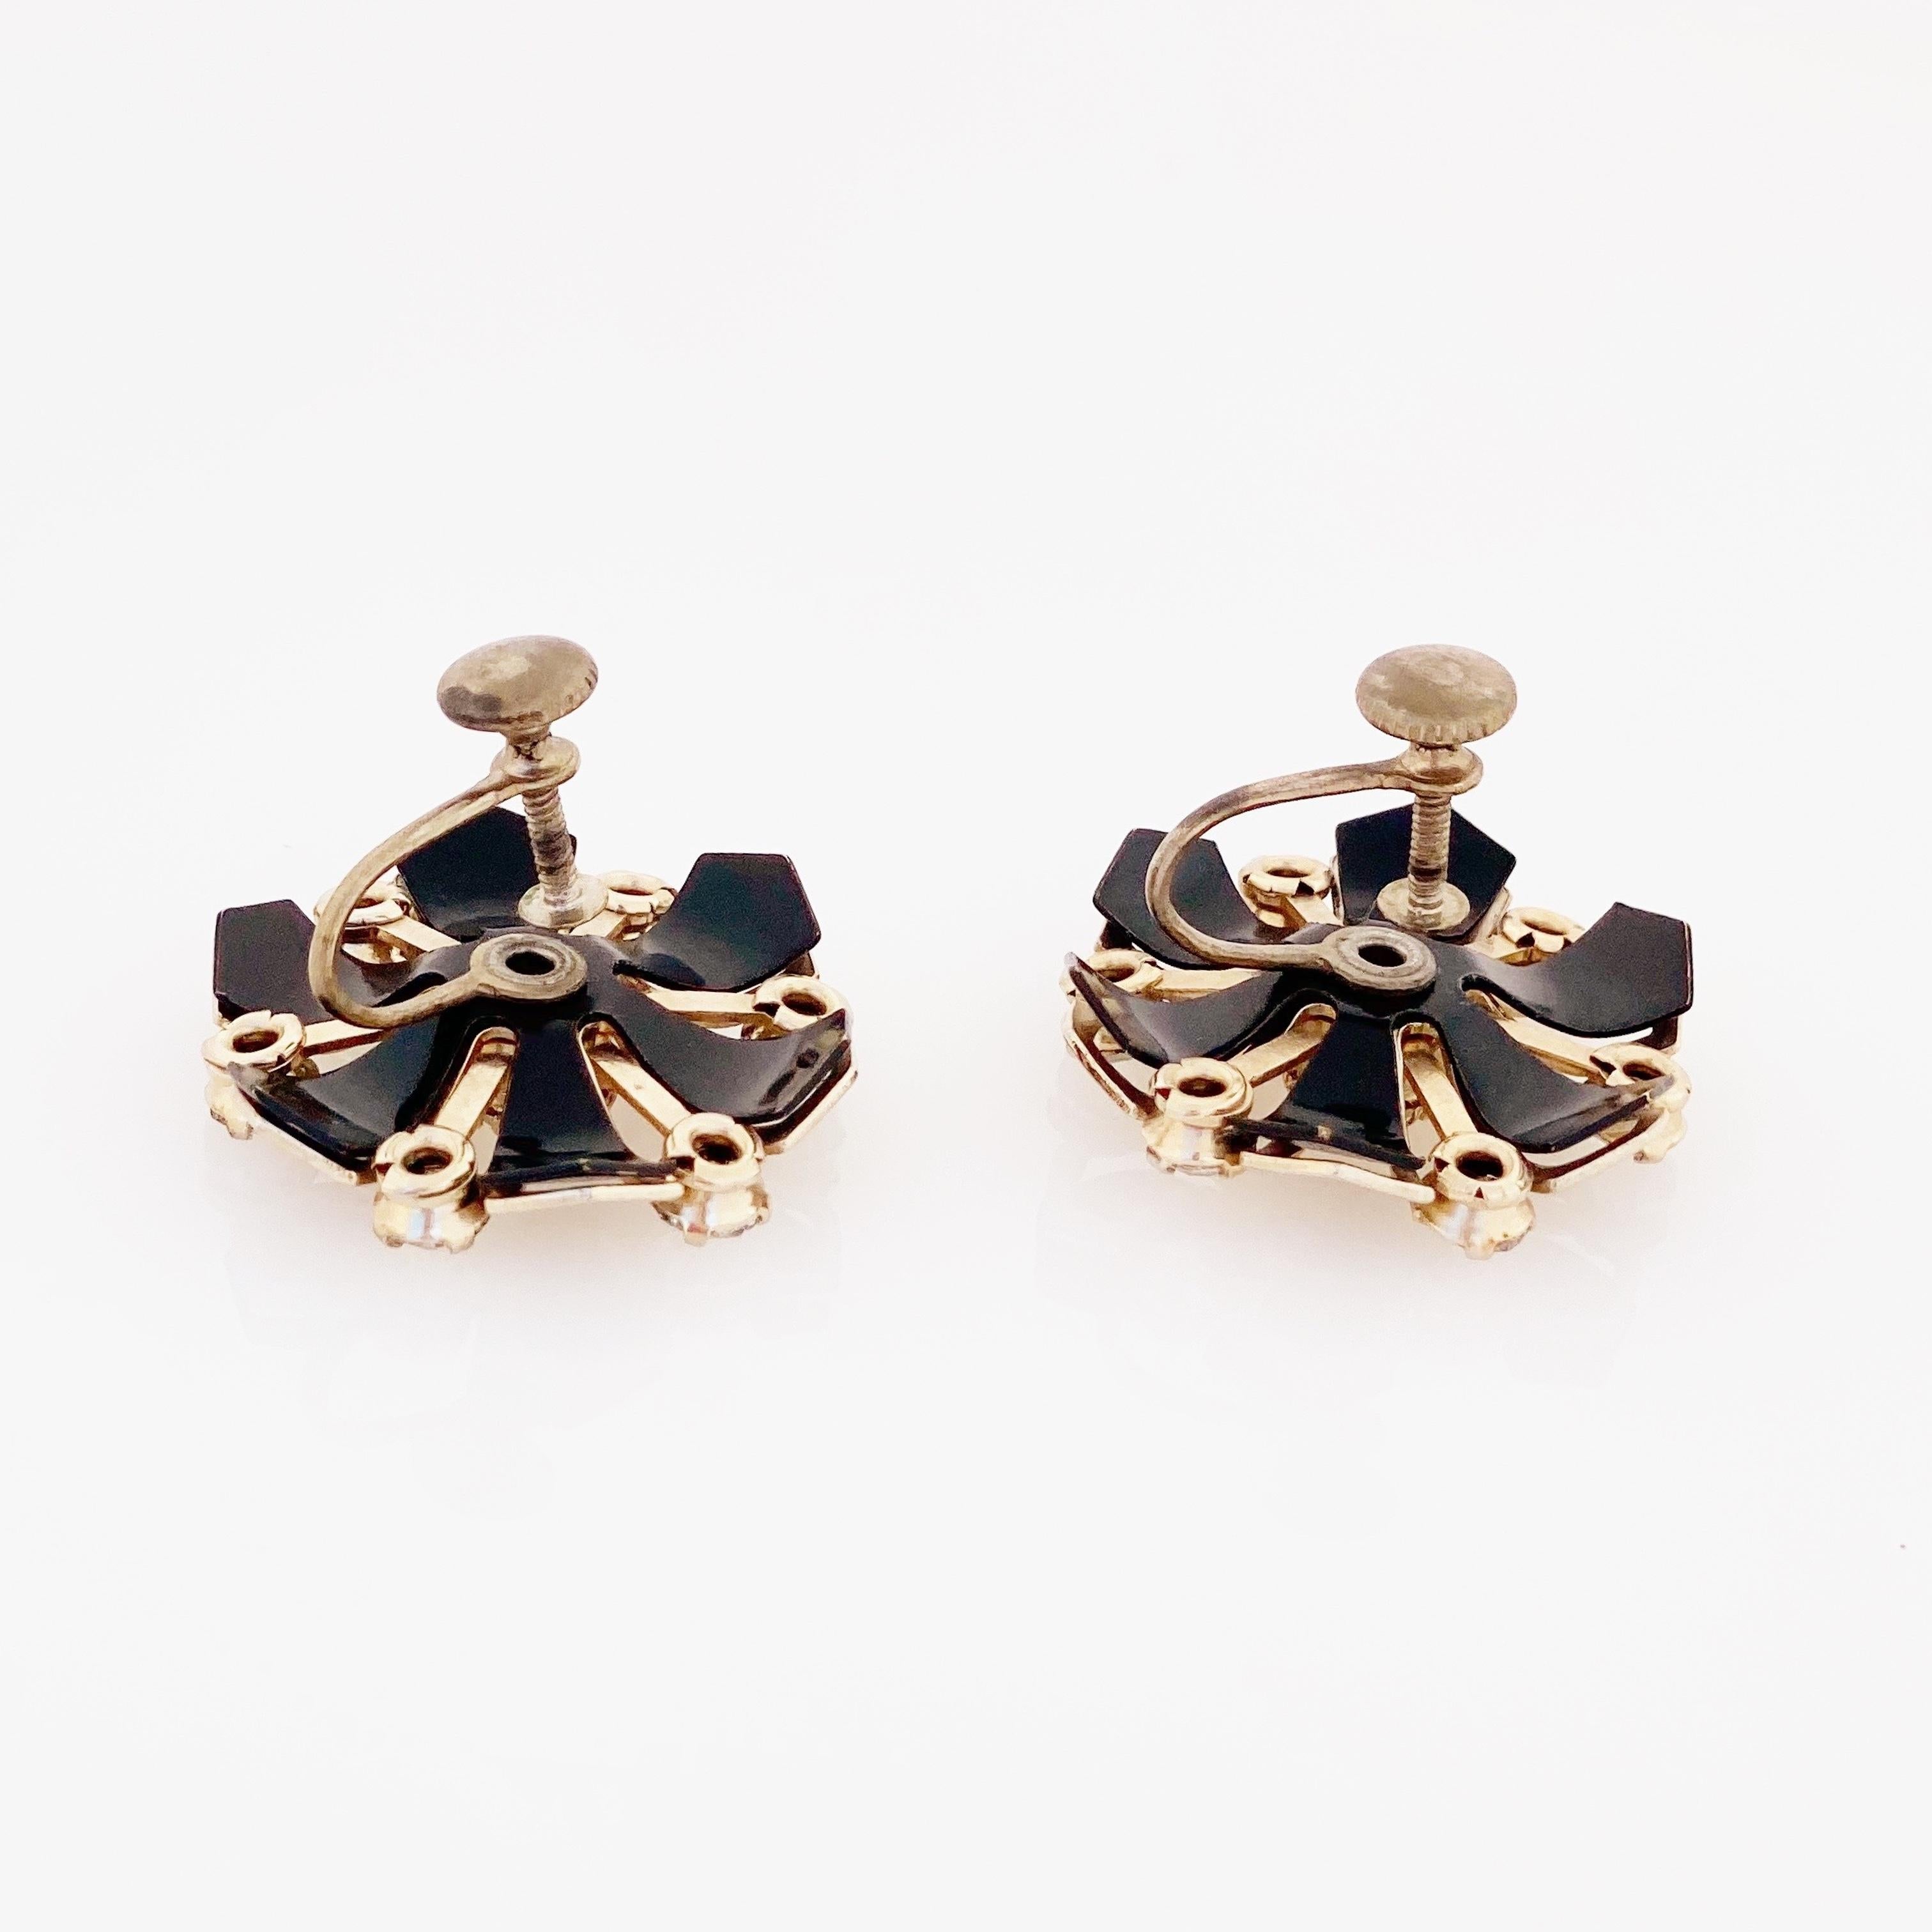 Art Deco Style Black Flower Earrings With Rhinestone Accents, 1950s In Good Condition For Sale In McKinney, TX